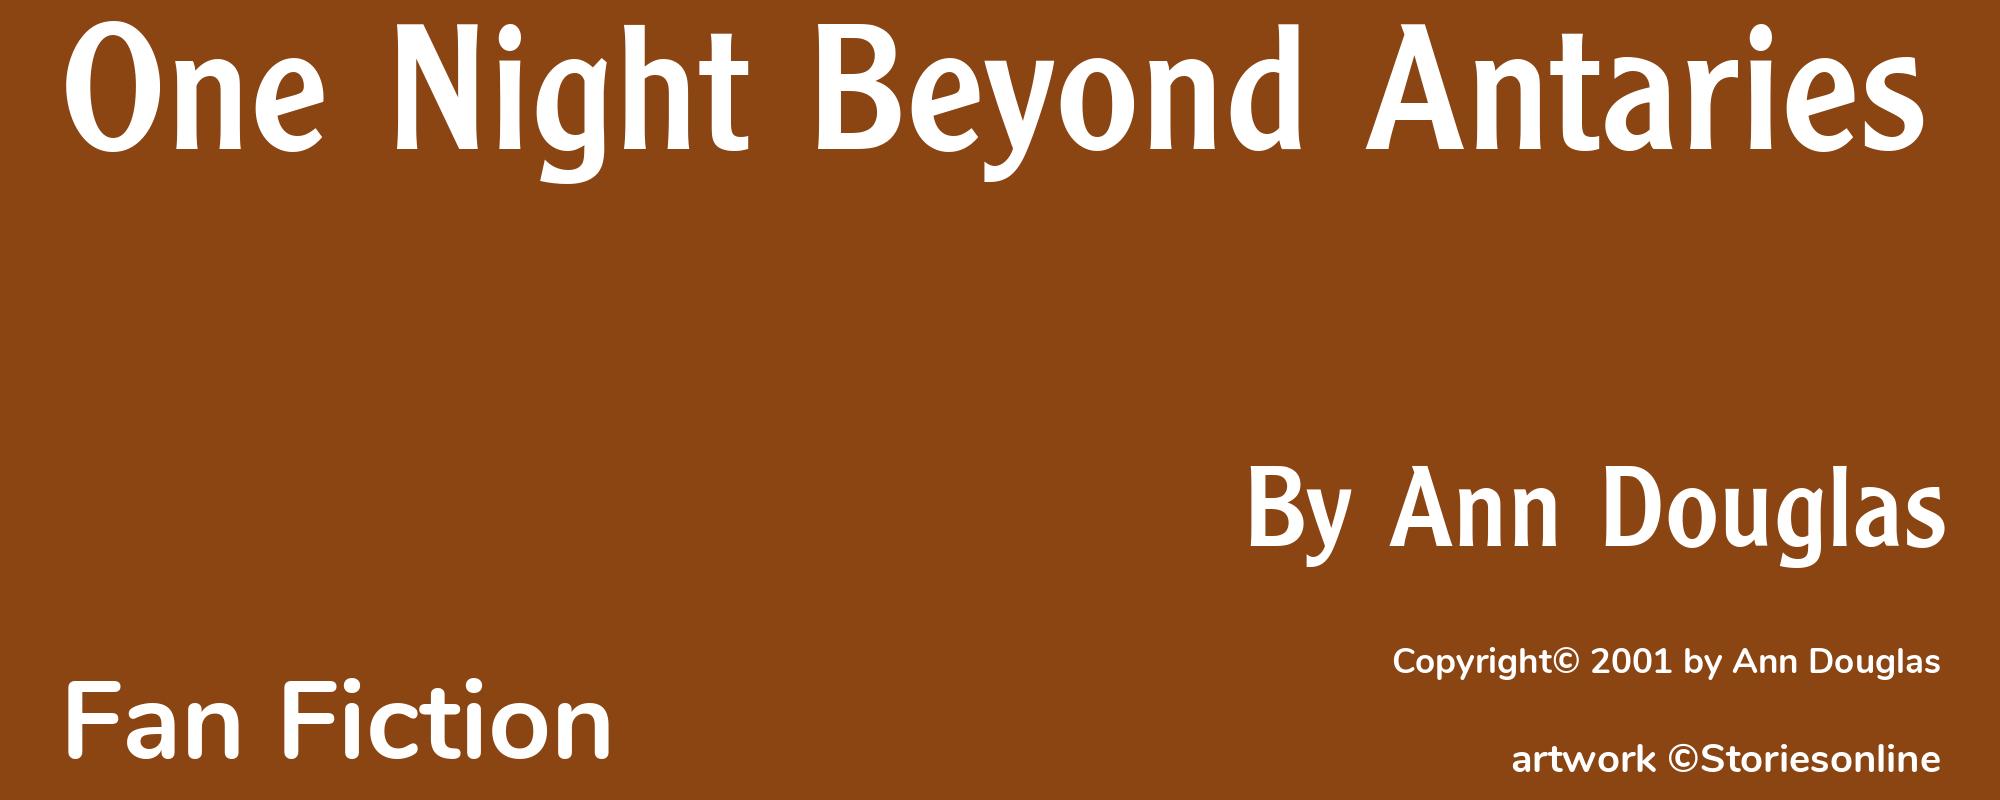 One Night Beyond Antaries - Cover